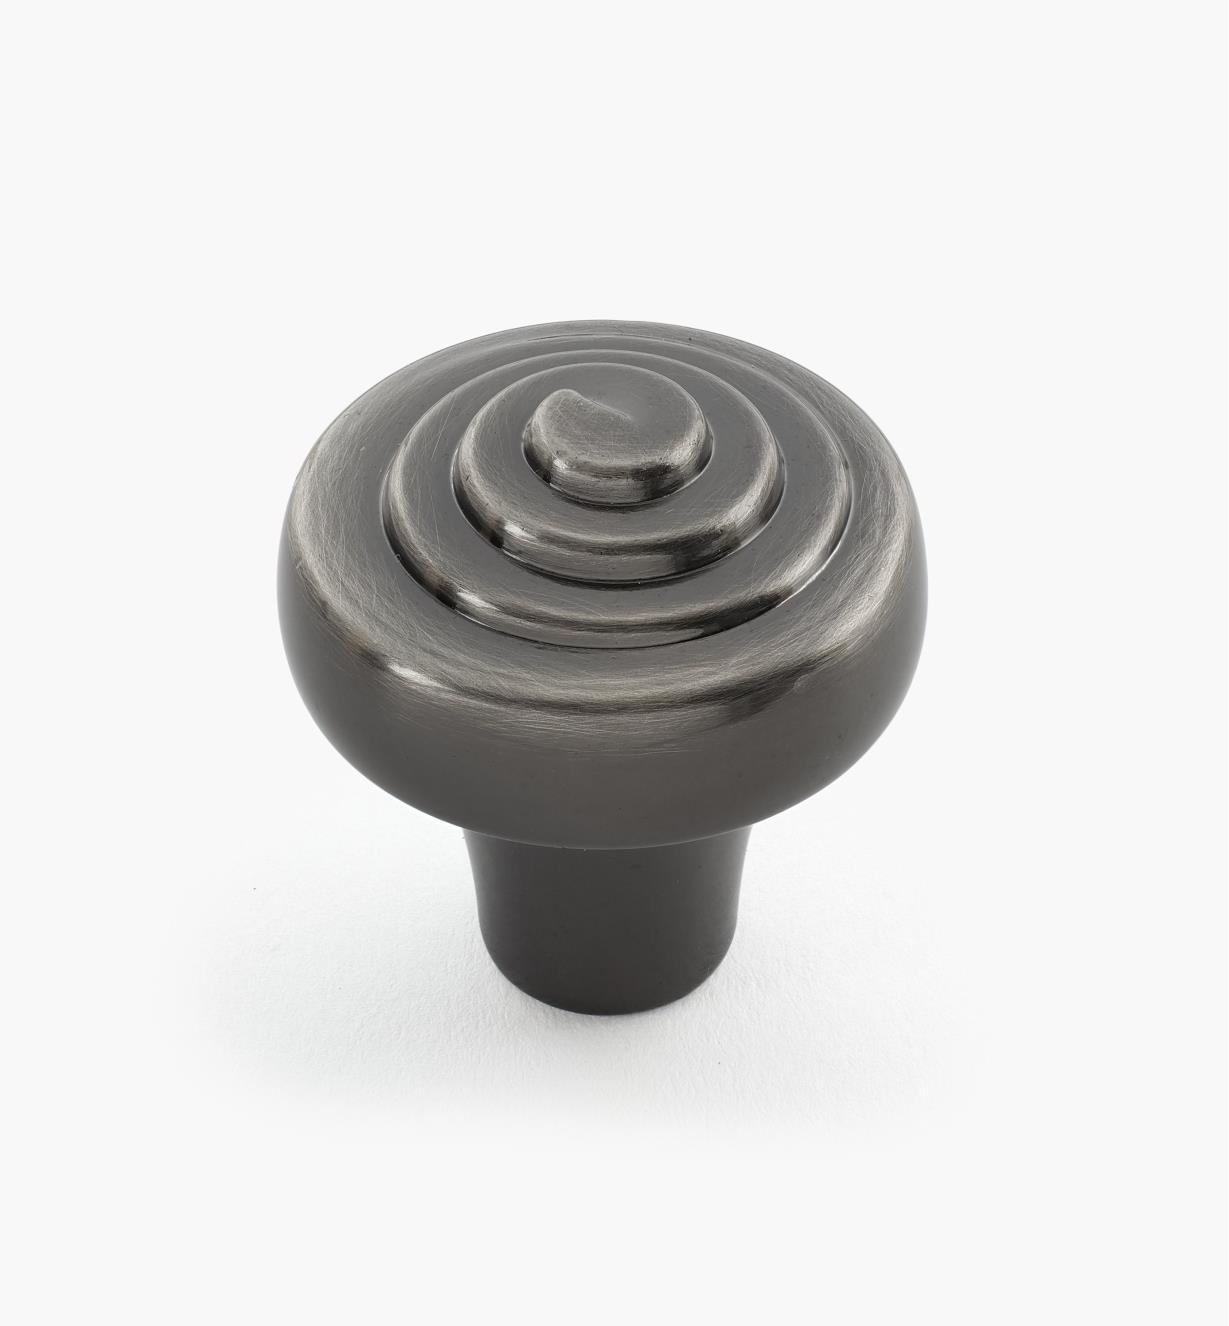 02A3212 - Divinity Pewter Knob